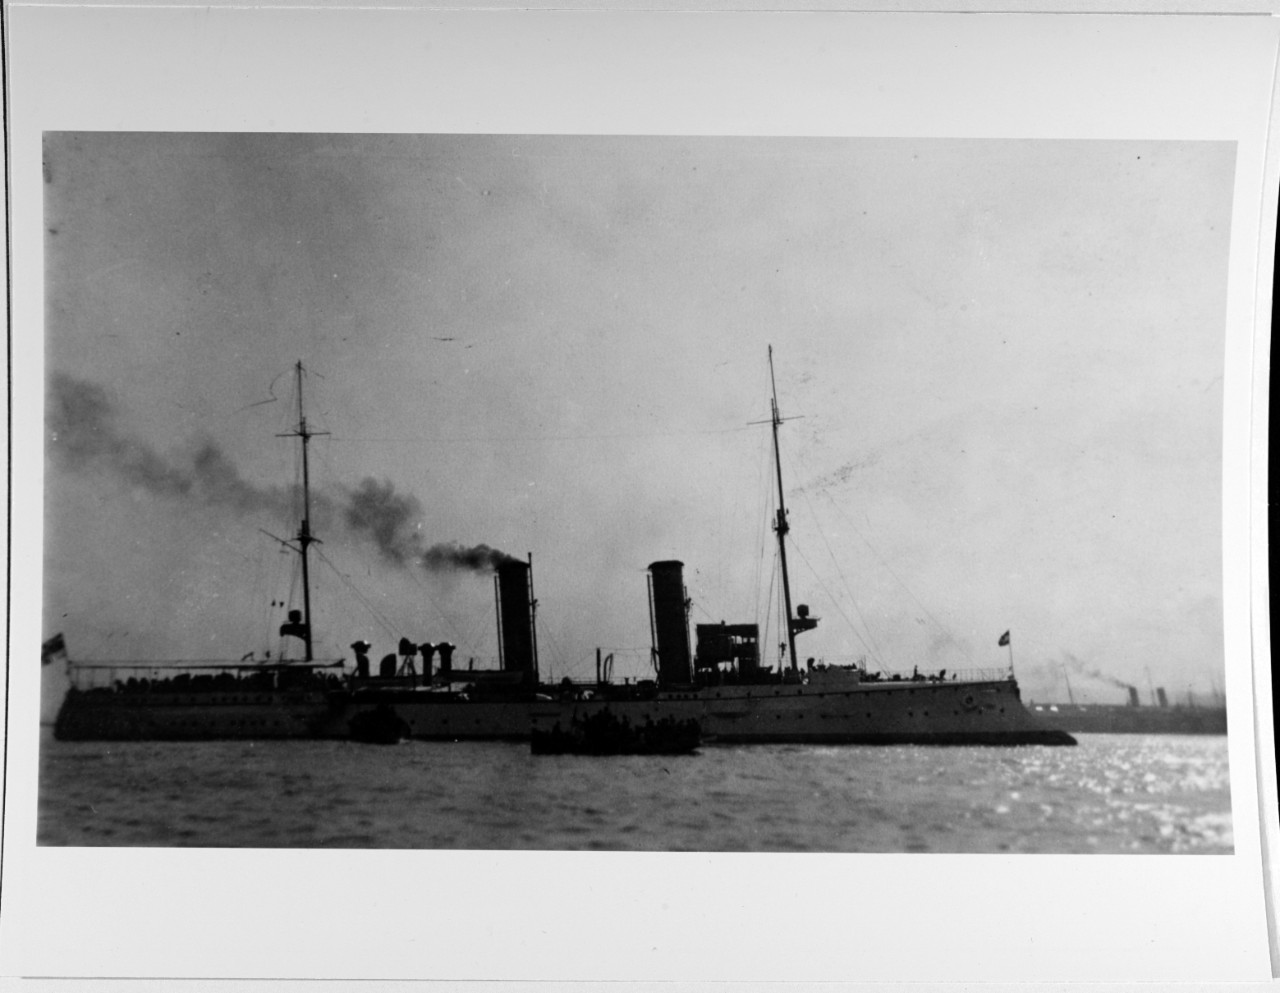 German cruiser of the NYMPHE class (launched circa 1903)